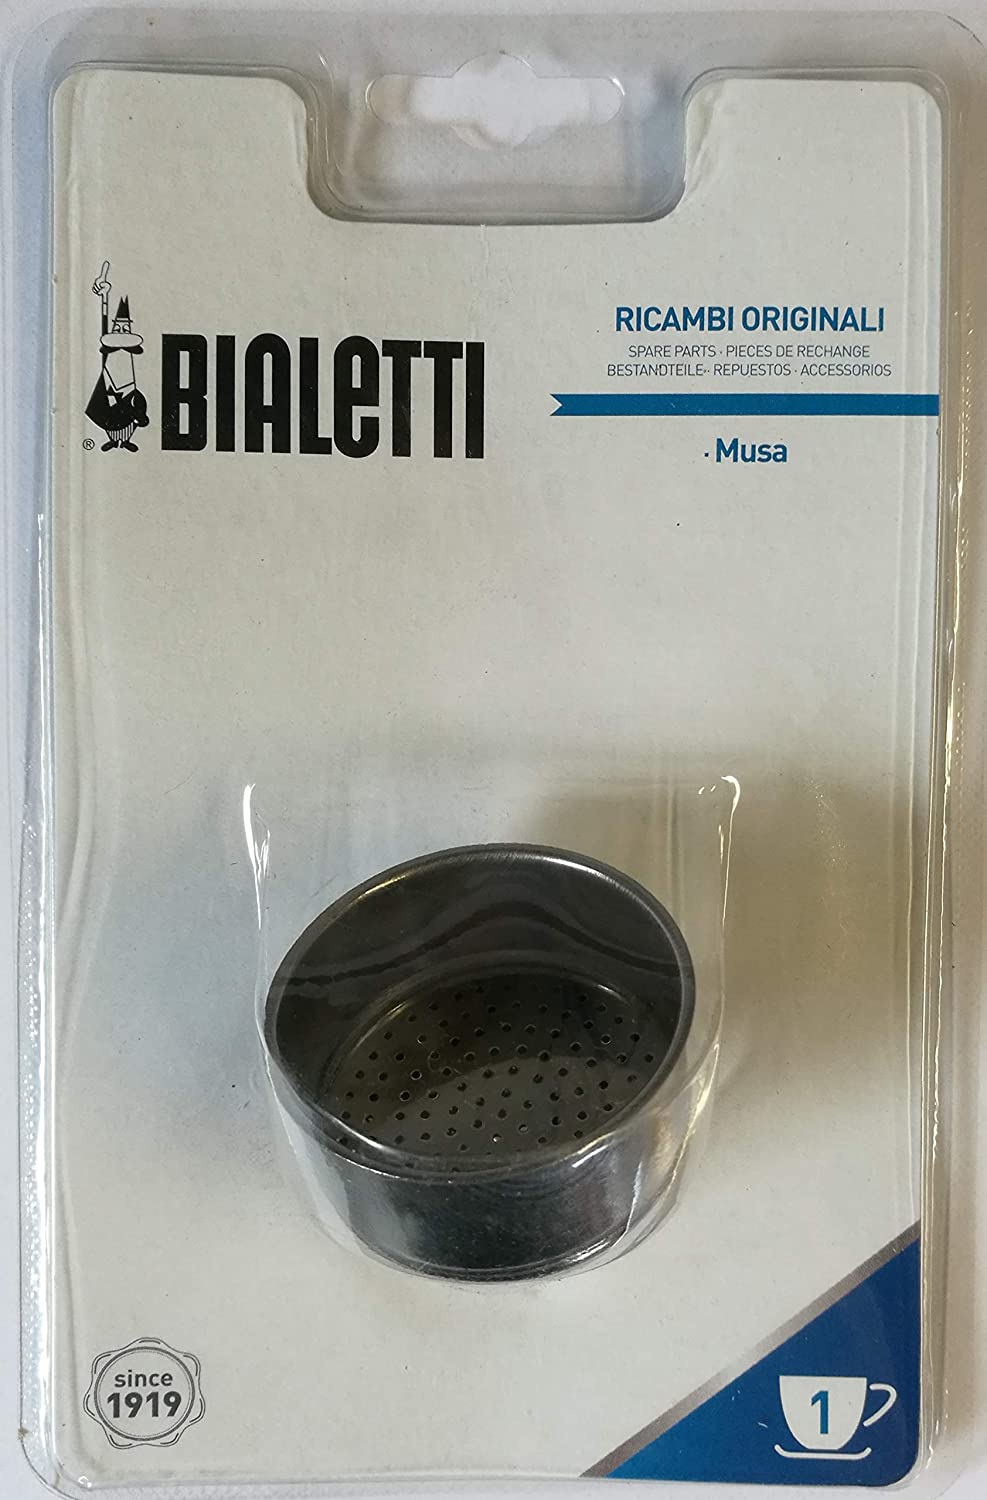 Bialetti 800500 0800500 parts and accessories for filter coffee machine, al